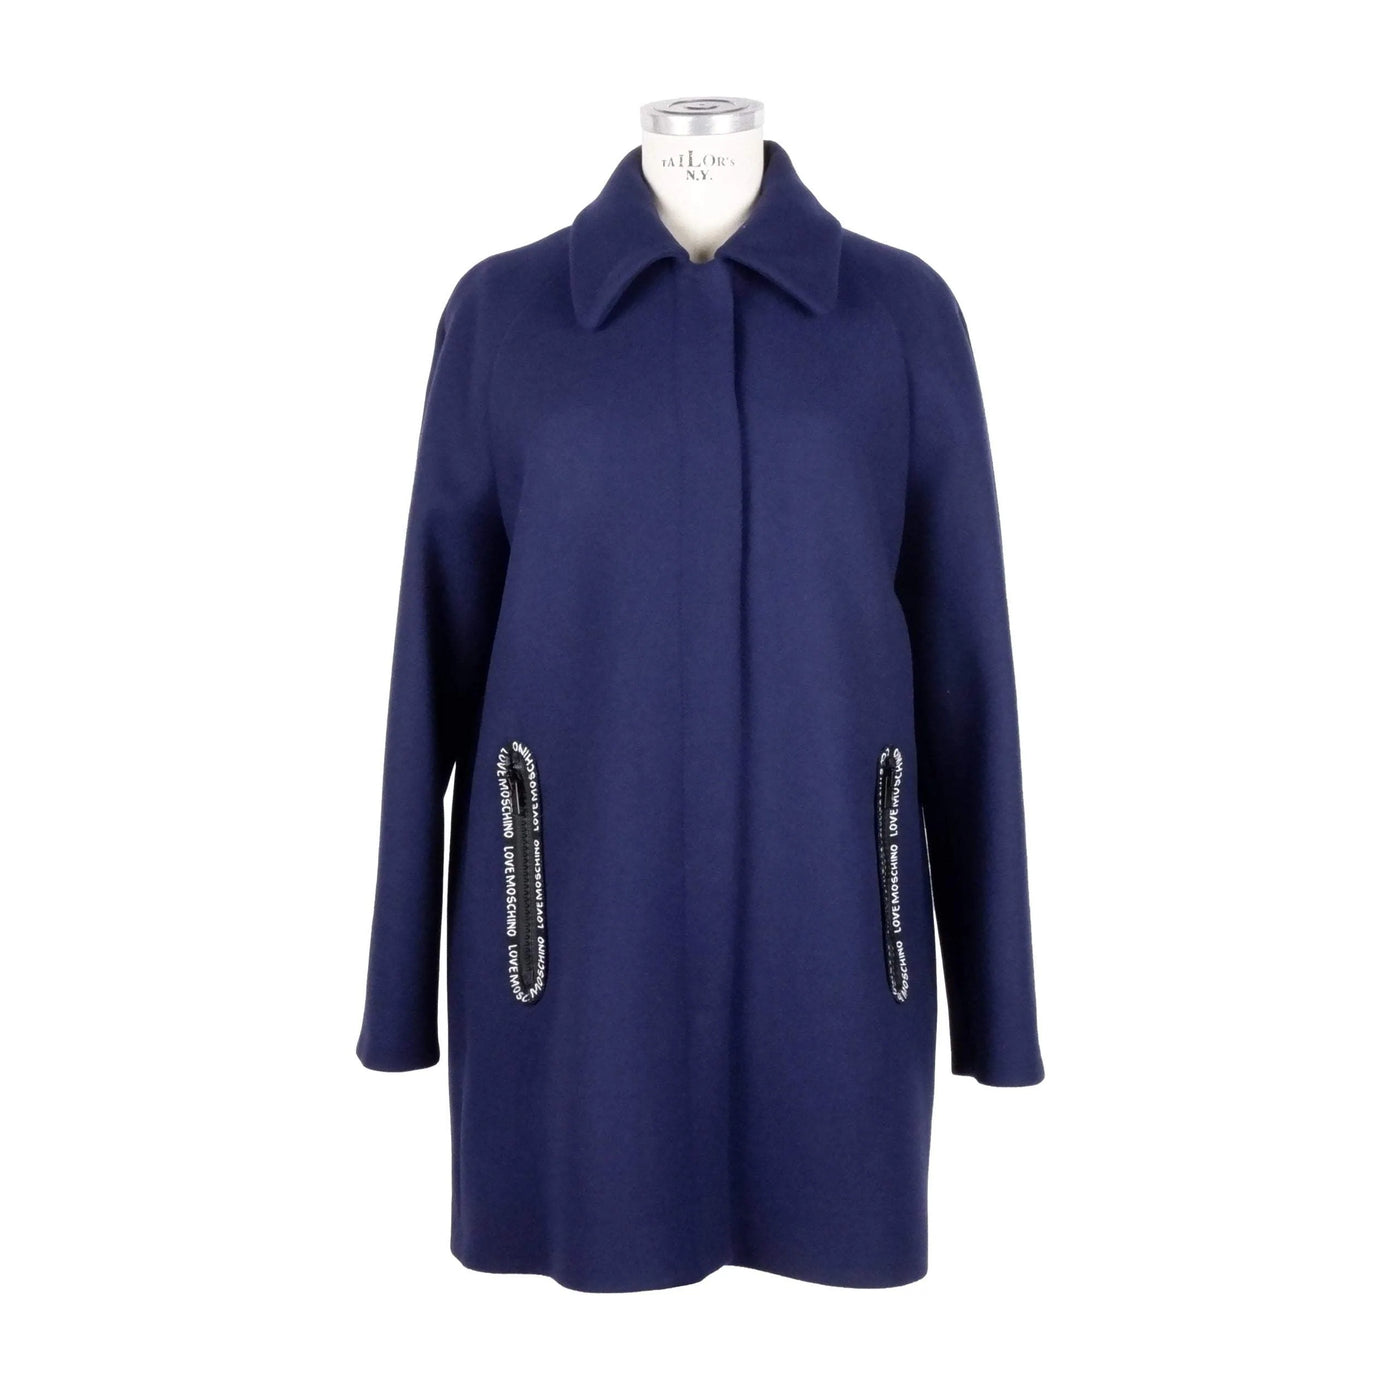 Love Moschino  Jackets & Coat #women, Blue, feed-agegroup-adult, feed-color-blue, feed-gender-female, IT42|M, IT44|L, IT46 | L, Jackets & Coats - Women - Clothing, Love Moschino at SEYMAYKA